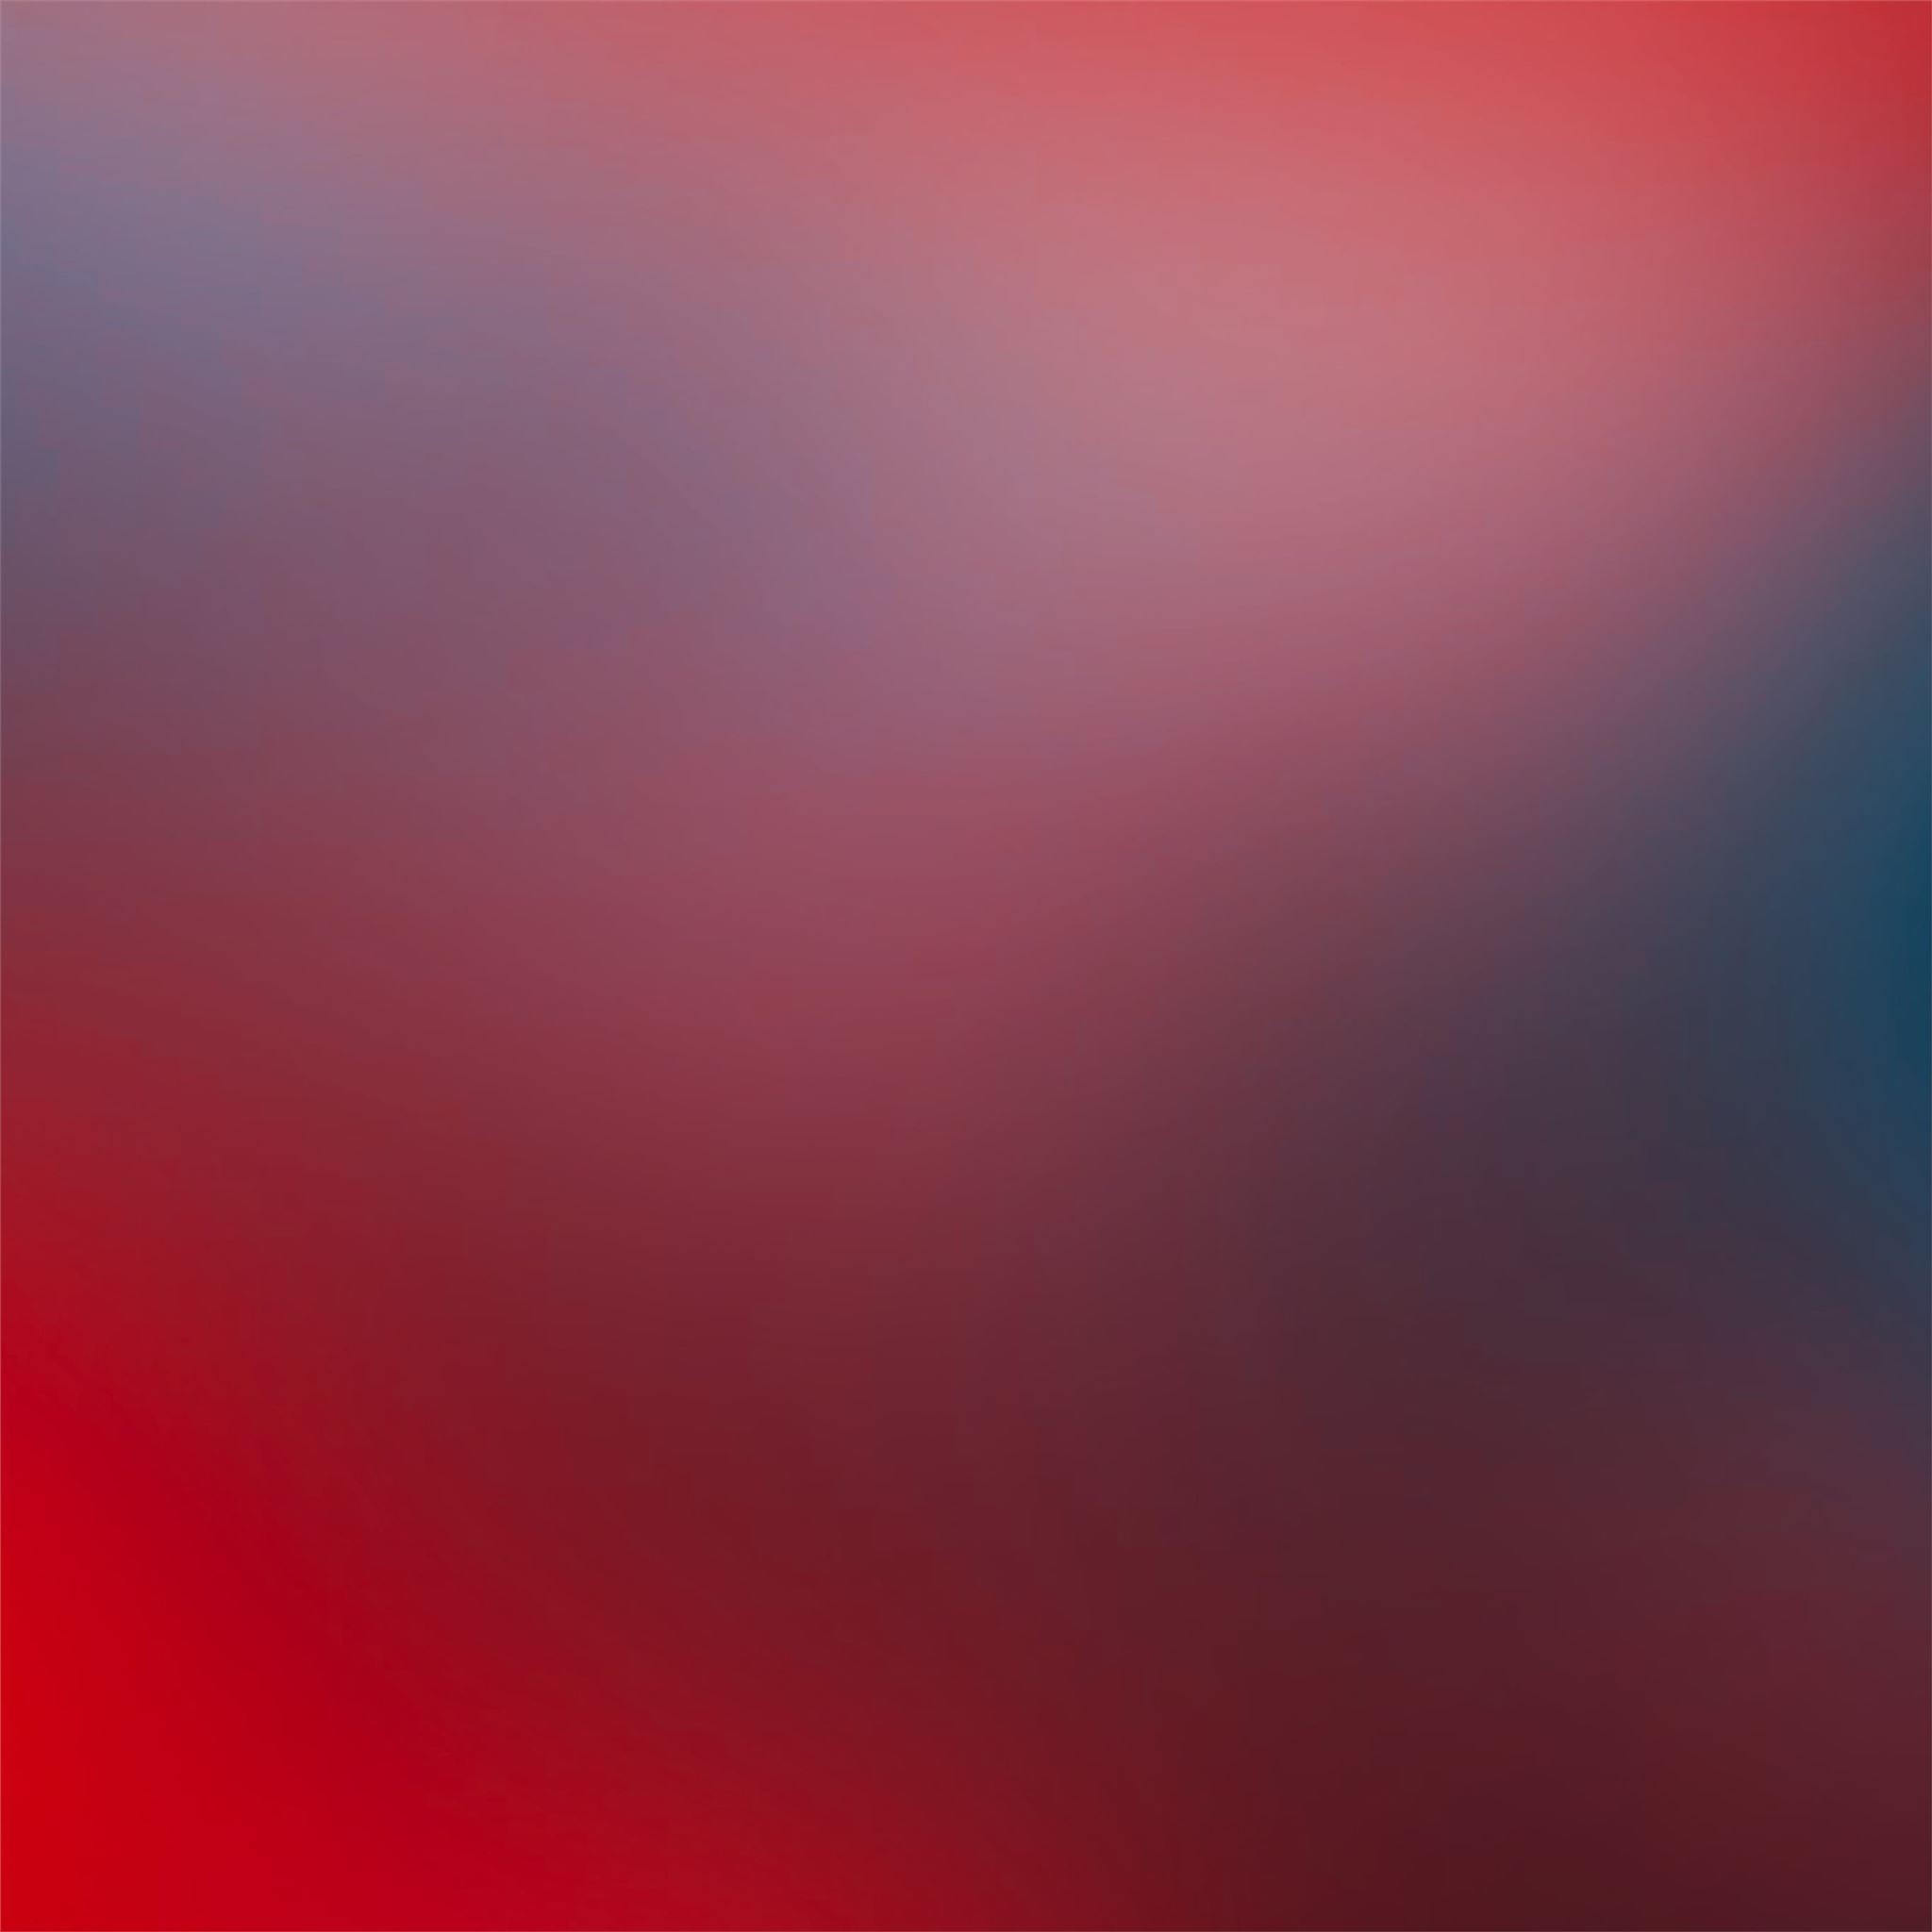 abstract red blur 4k iPad Wallpaper Free Download